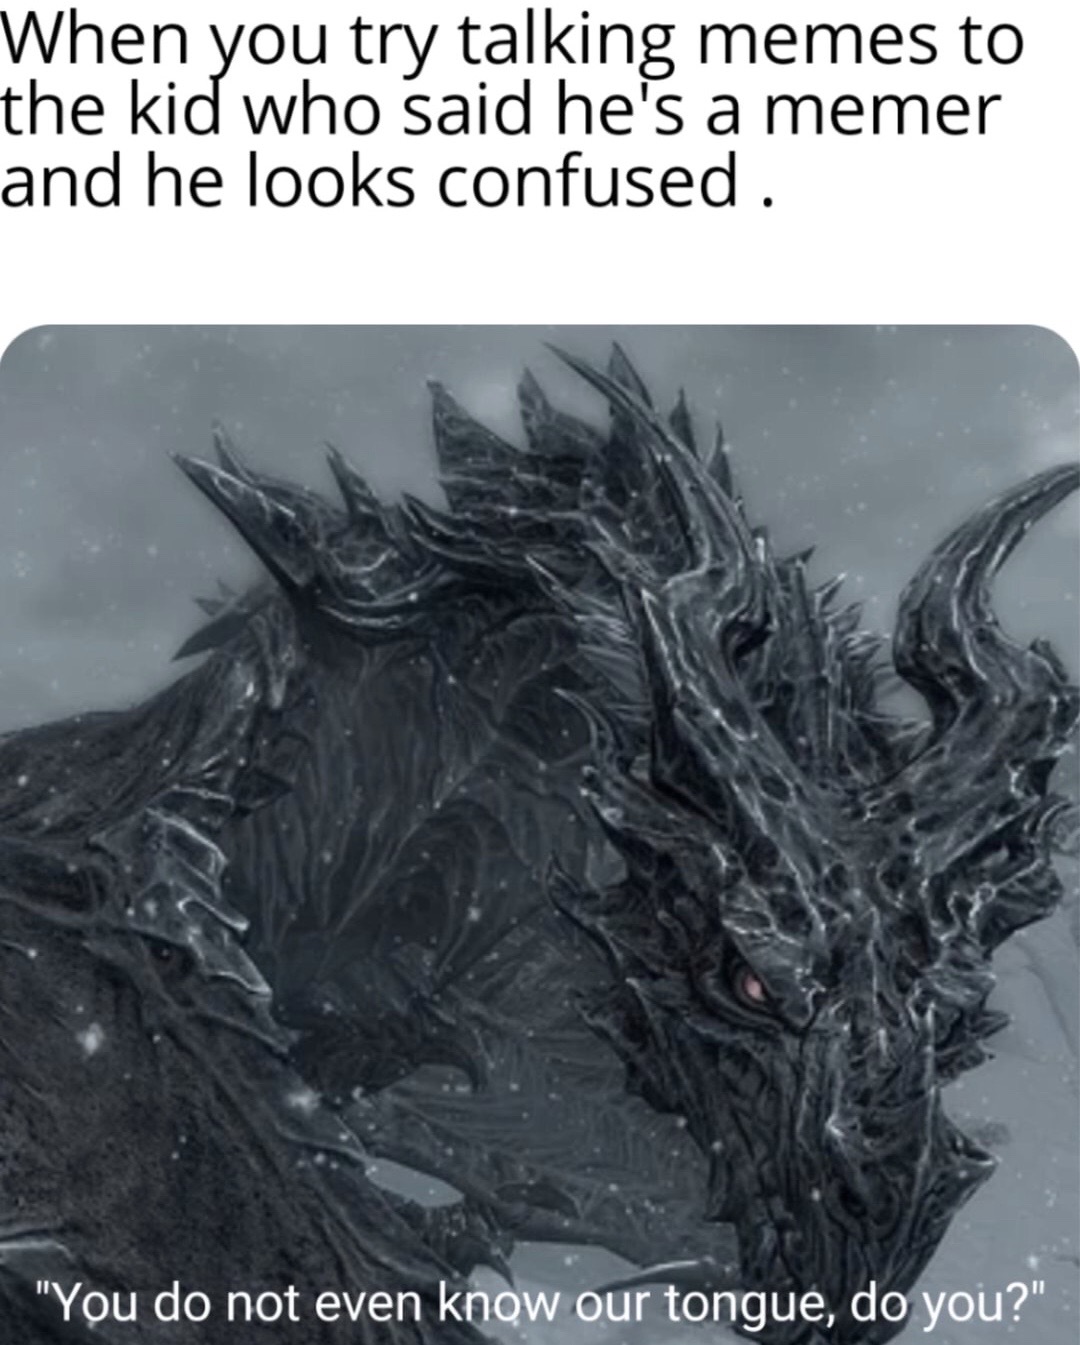 skyrim alduin skull - When you try talking memes to the kid who said he's a memer and he looks confused. "You do not even know our tongue, do you?"